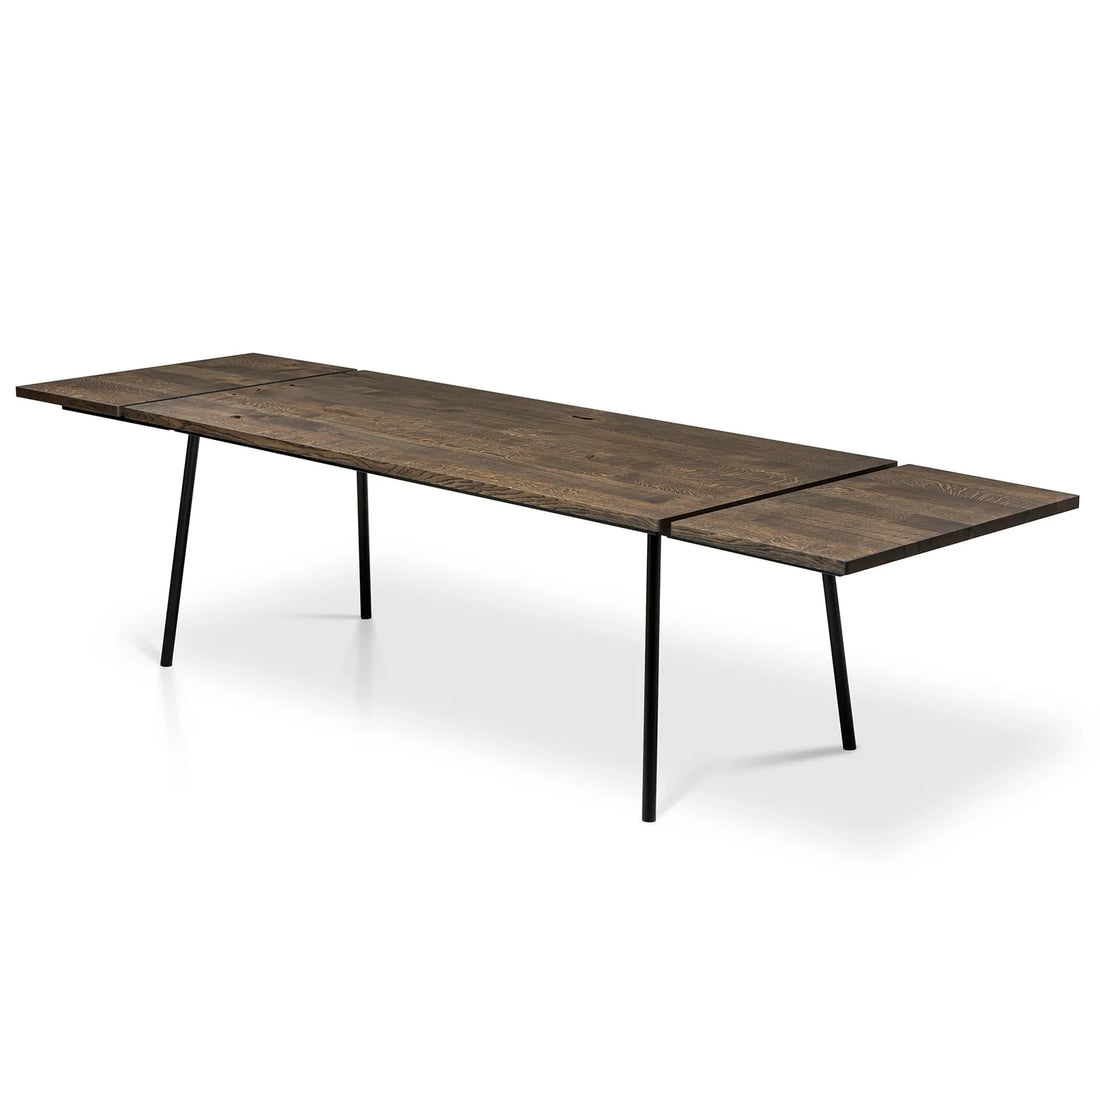 Mia Charcoal Oak Dining Table Extendable - S10Home